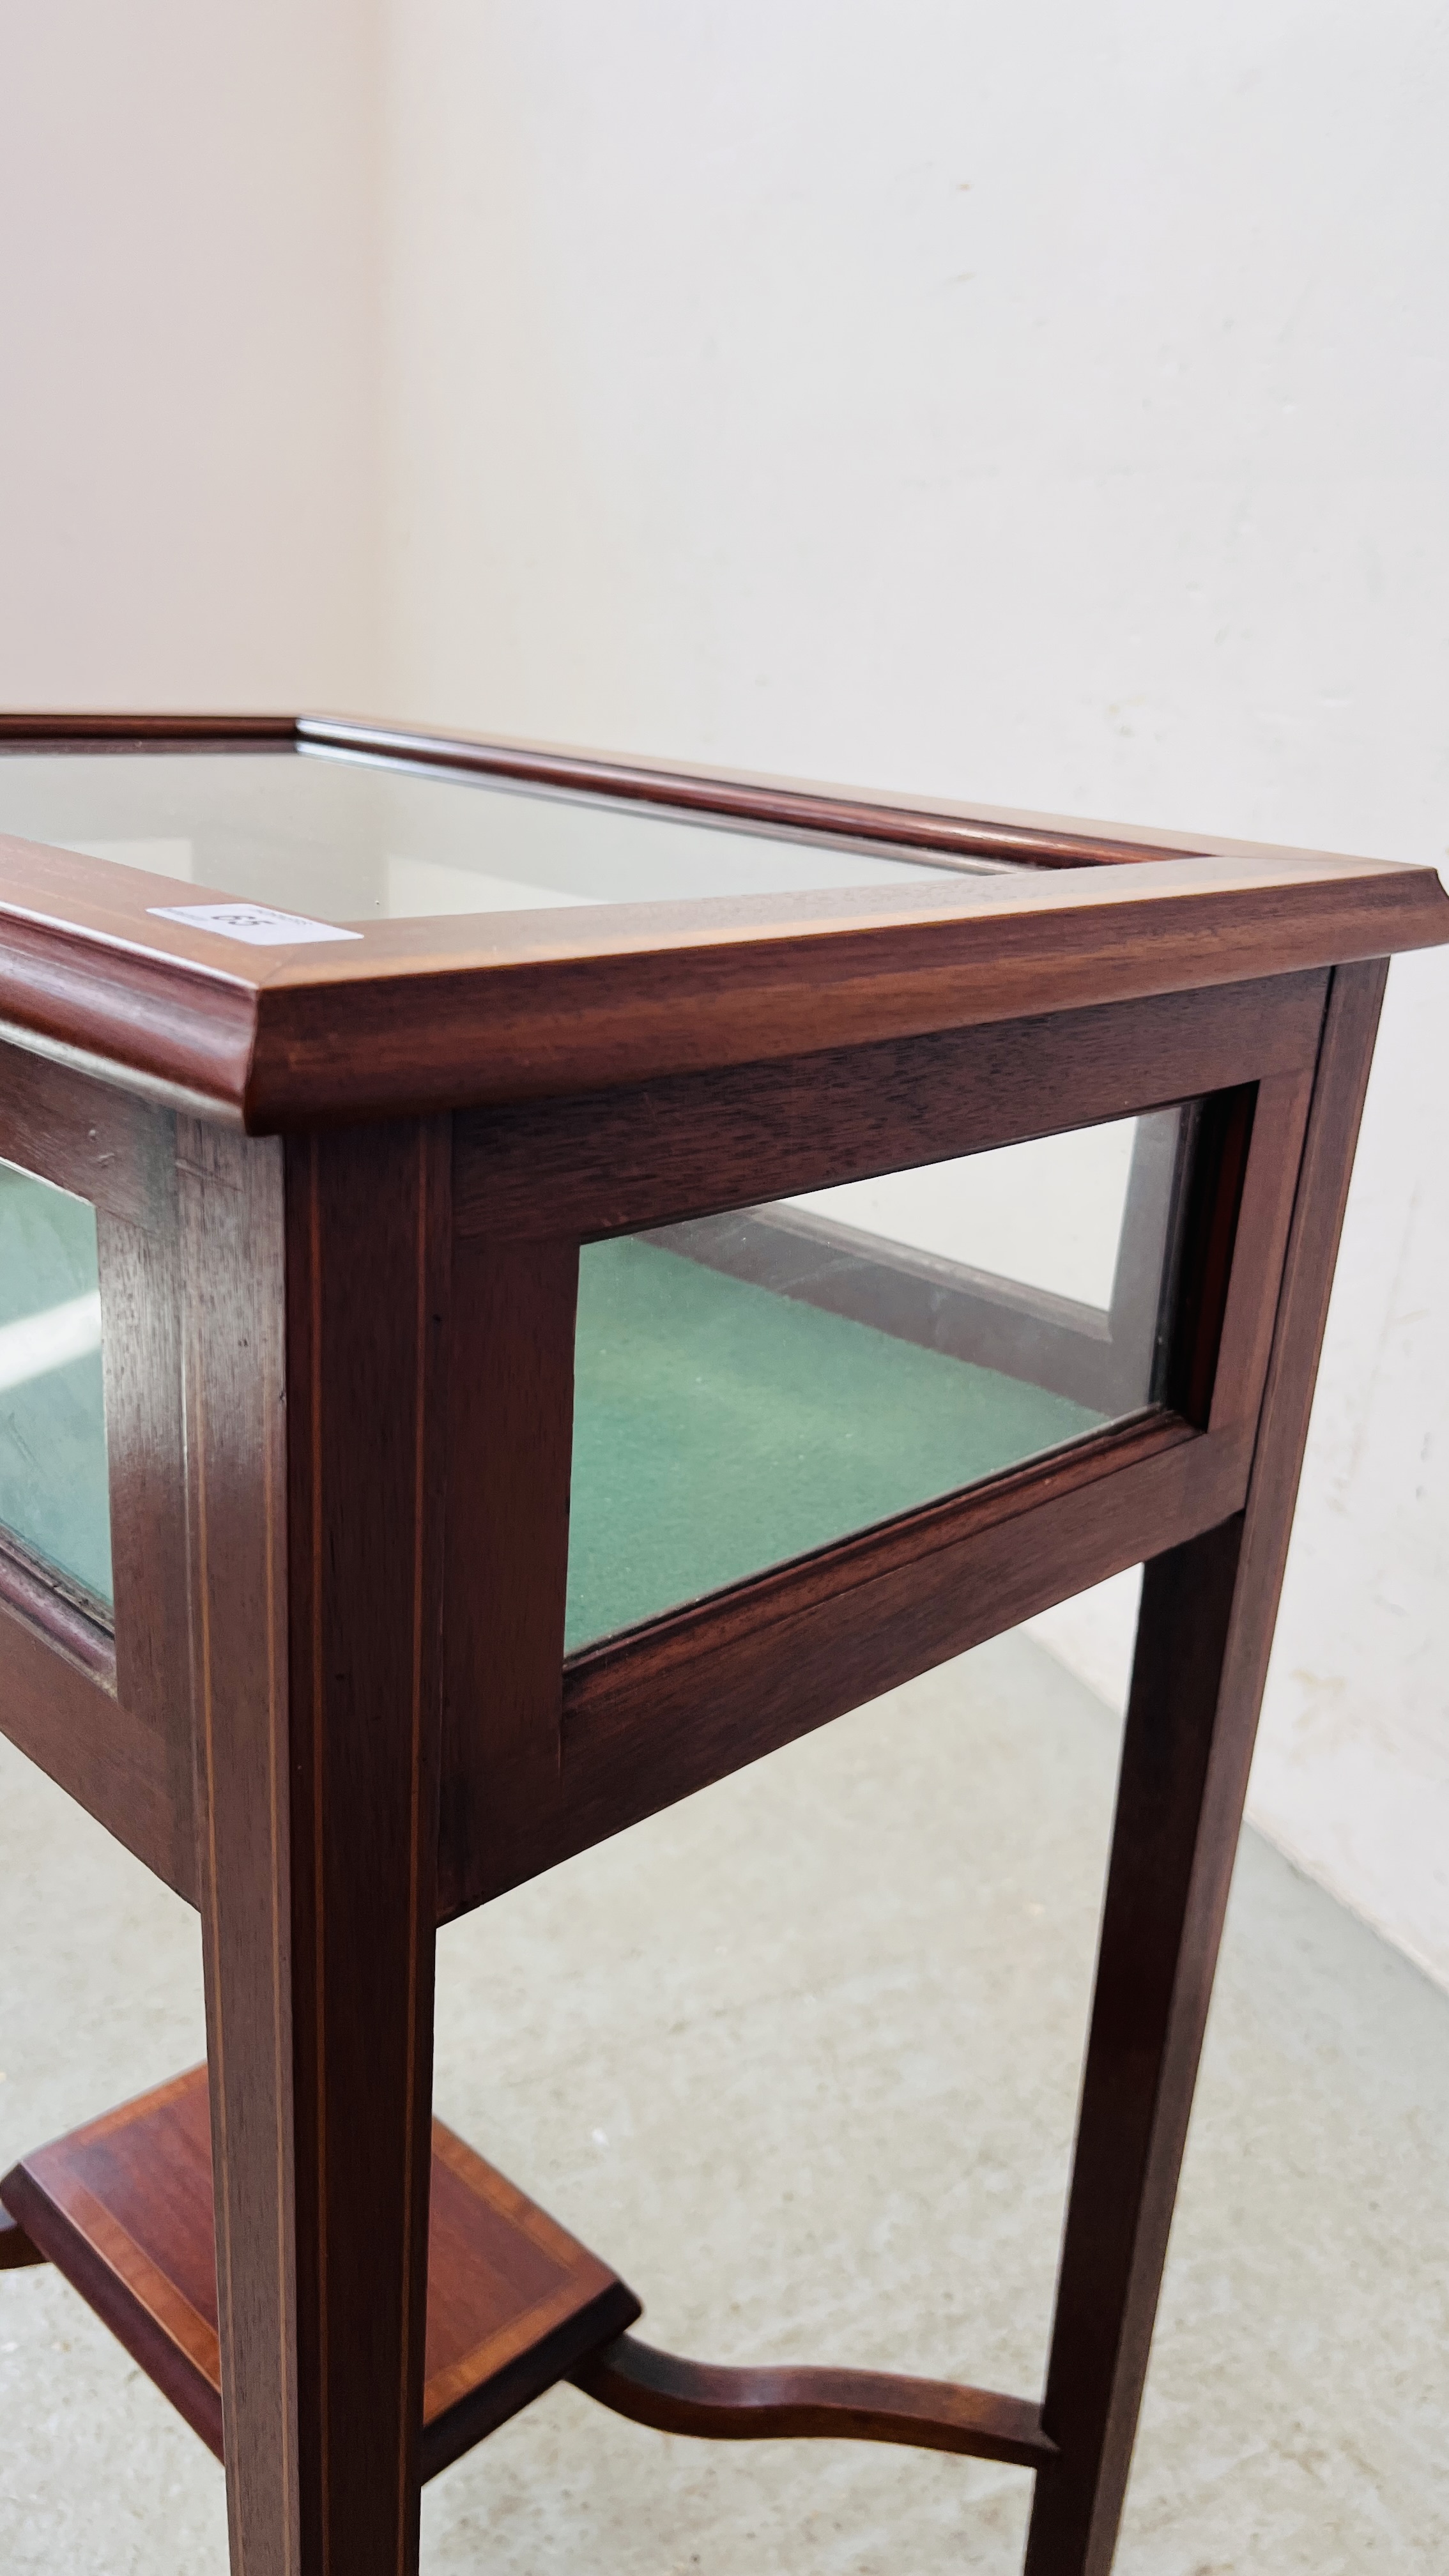 A MAHOGANY AND INLAID GLASS CASED FLOOR STANDING DISPLAY CASE W 57CM. H 76CM. D 40CM. - Image 6 of 11